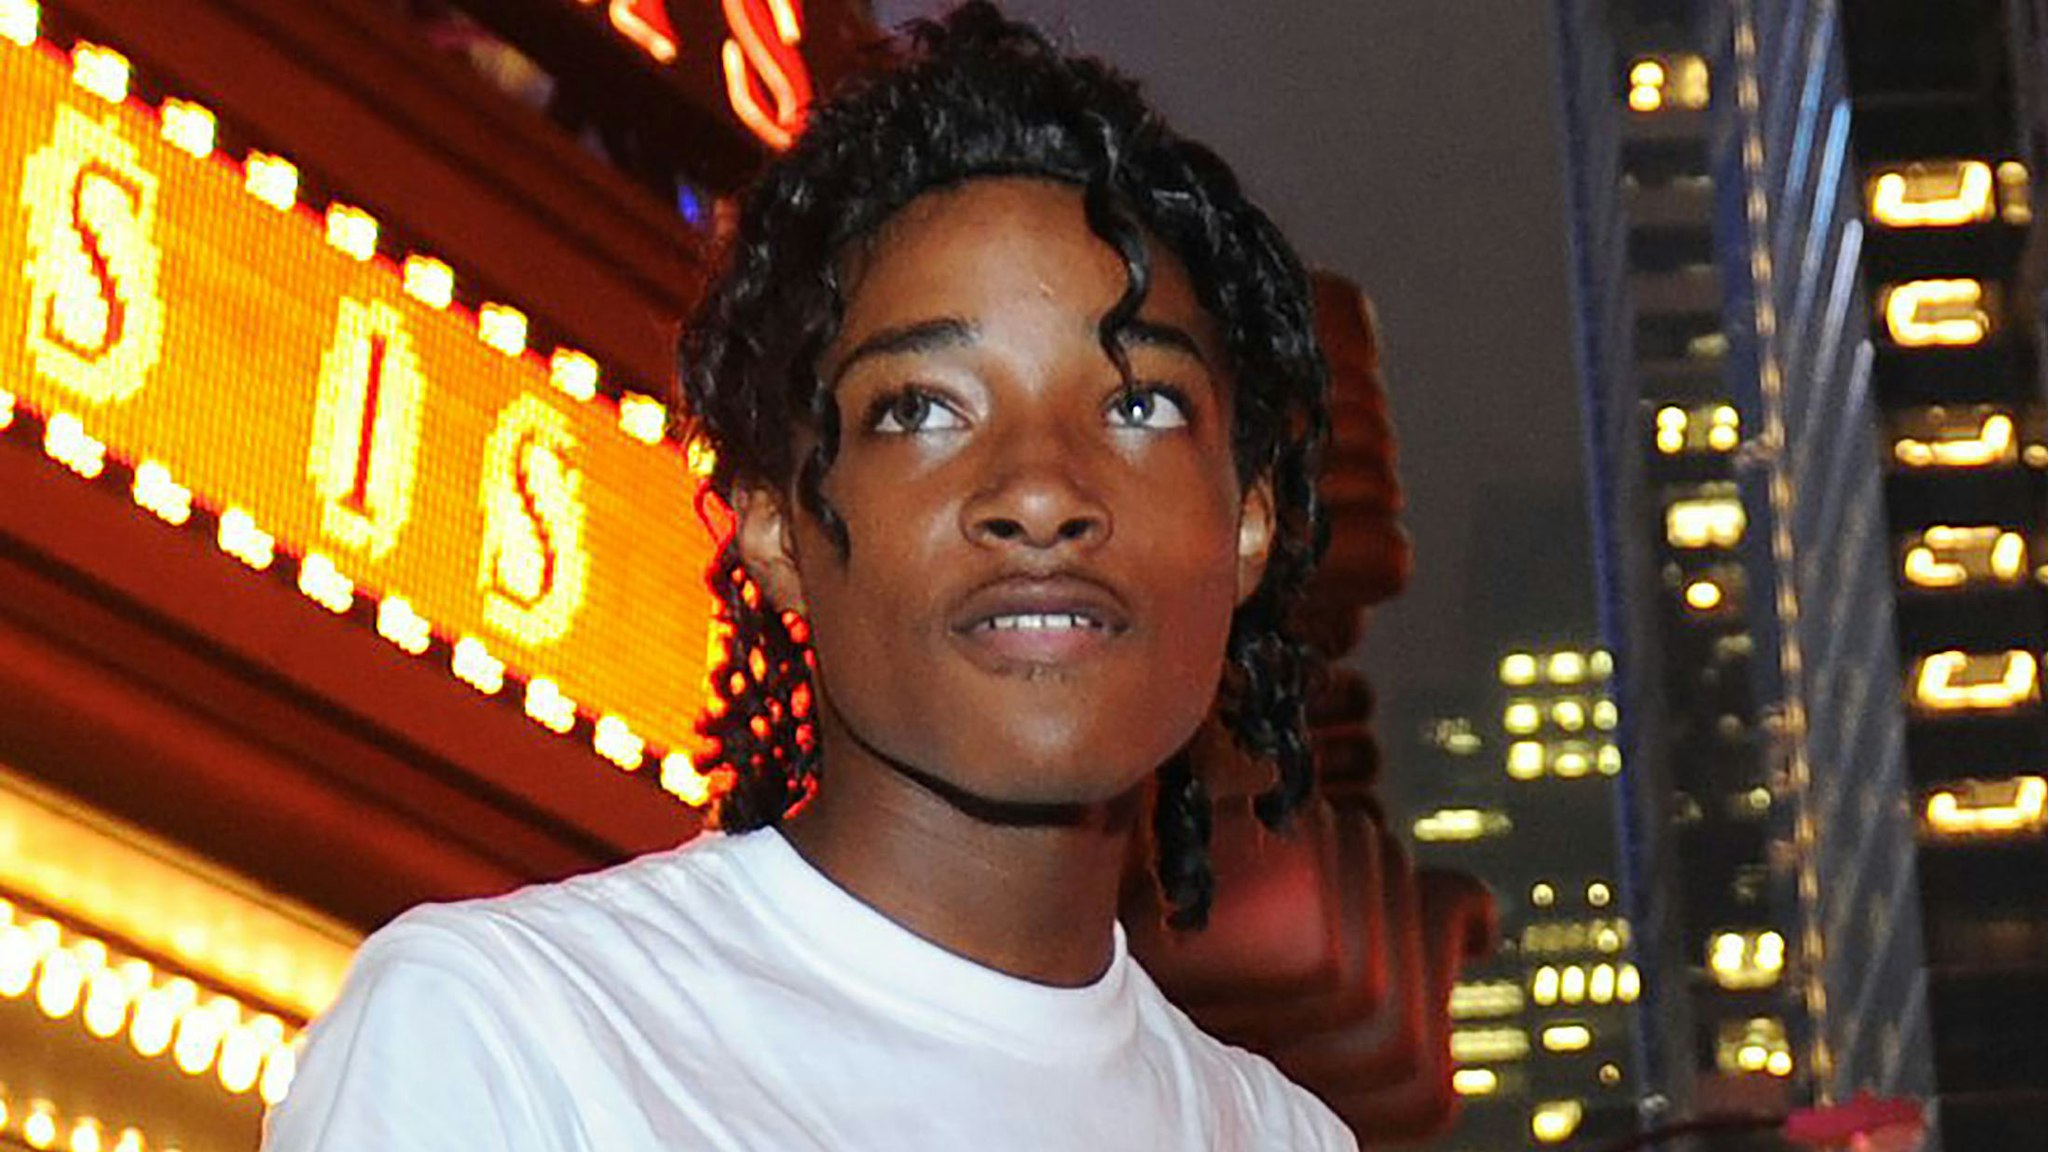 Jordan Neely is pictured before going to see the Michael Jackson movie, &quot;This is It,&quot; outside the Regal Cinemas on Eighth Avenuereetand 42nd St. in Times Square, New York, in 2009.